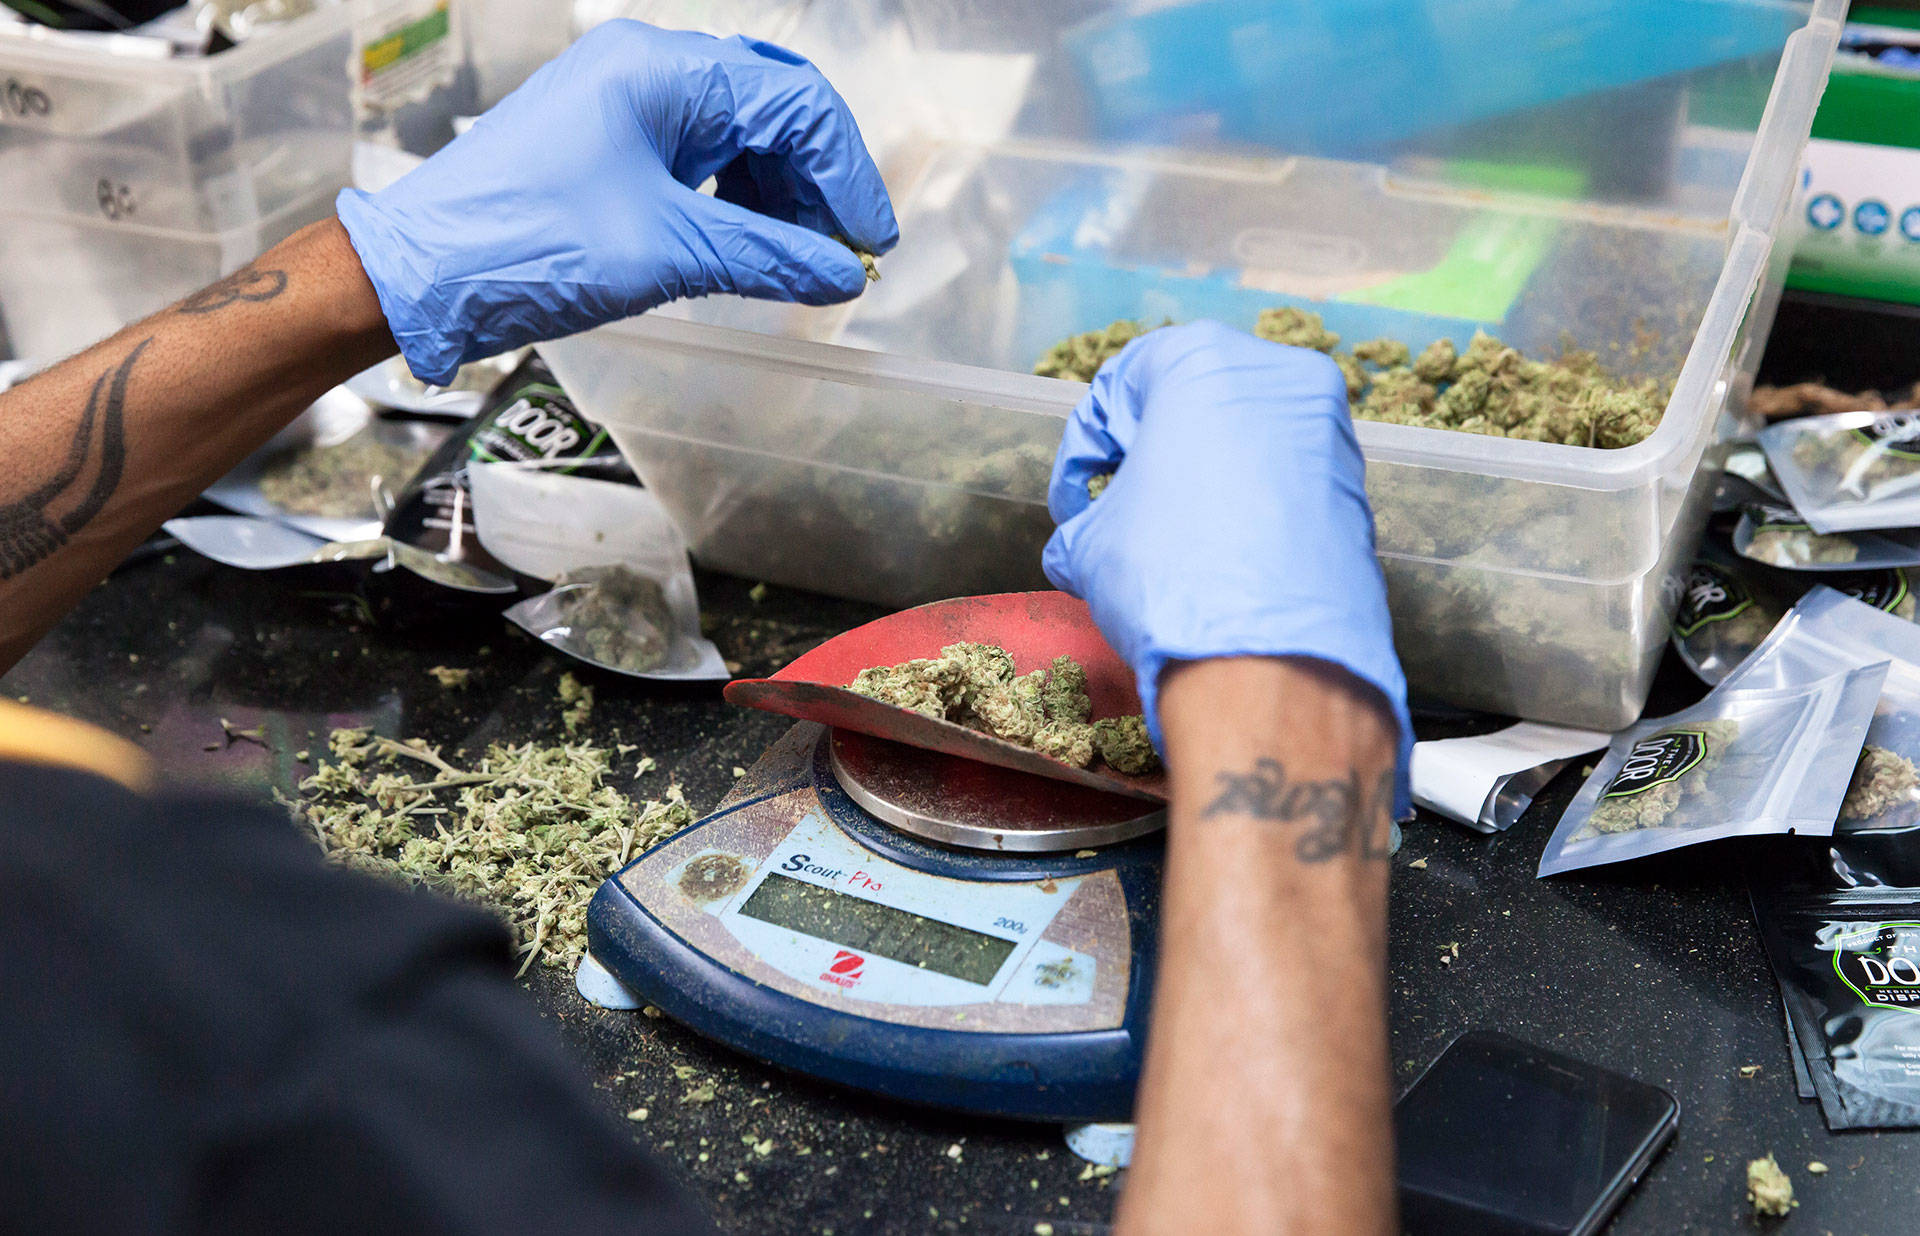 Cannabis buds are weighed before being packaged for sale at the Green Door Dispensary in San Francisco. Brittany Hosea-Small/KQED